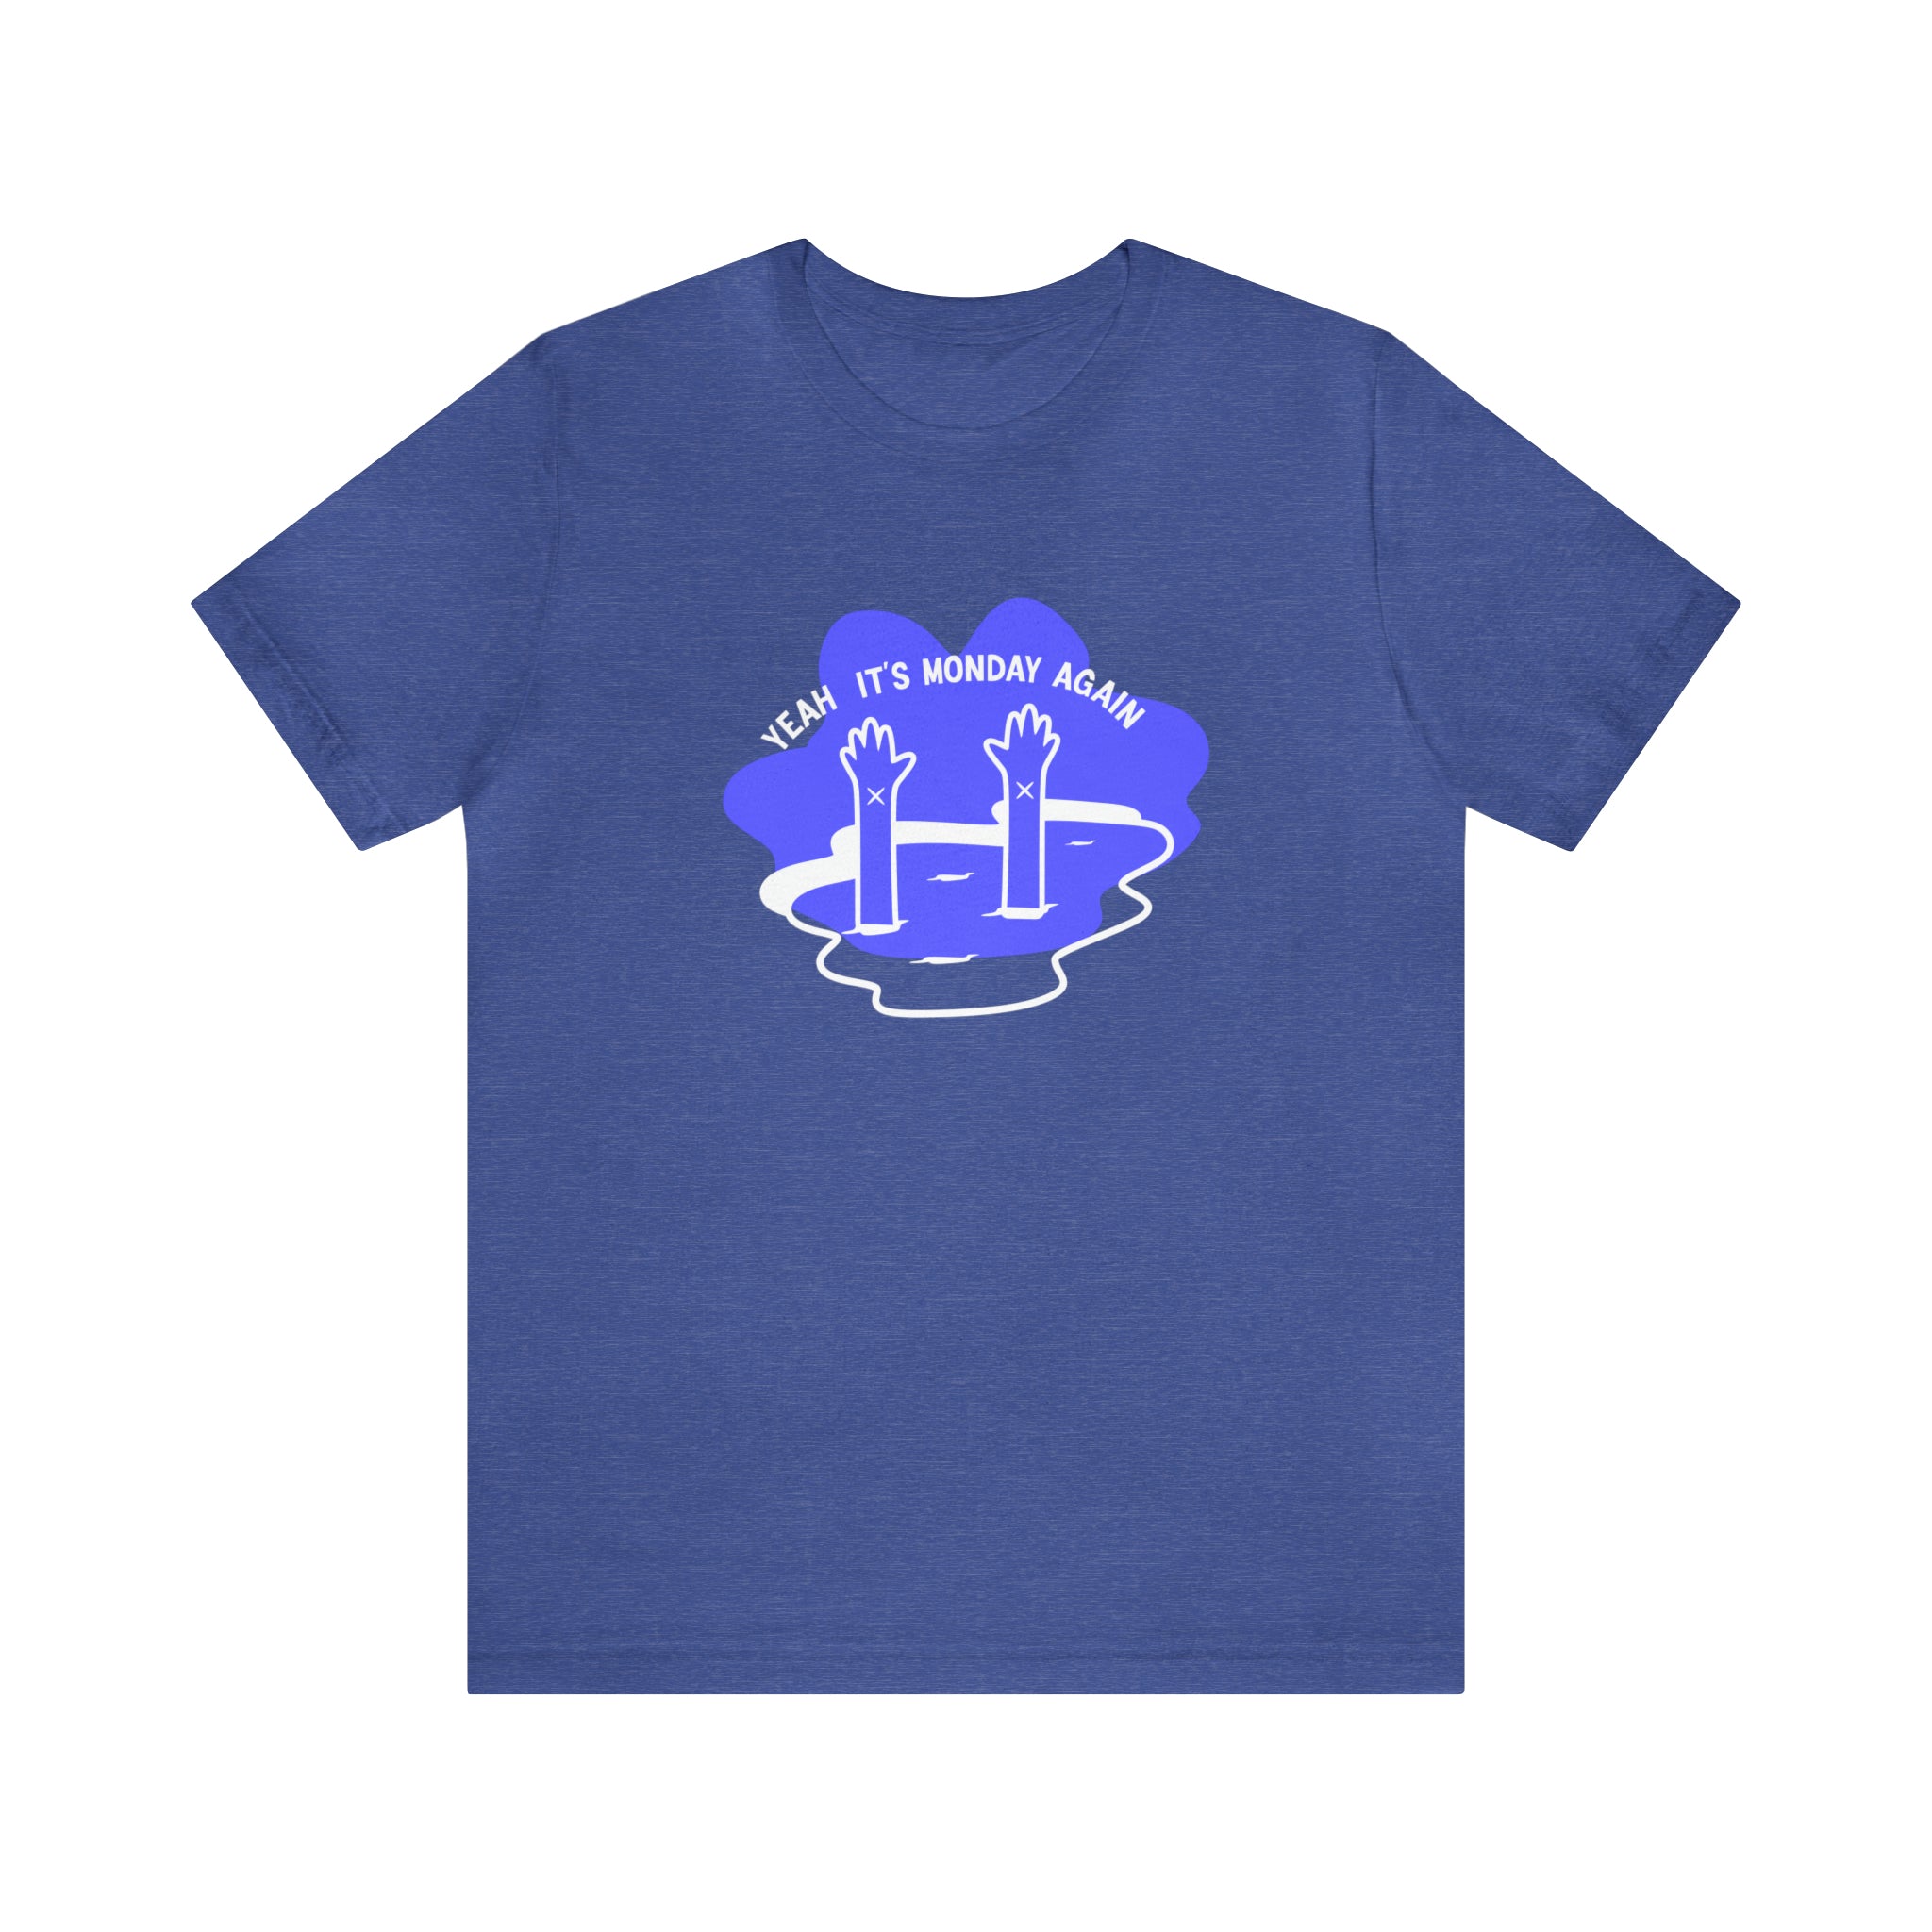 A Yeah Its Monday Again T-Shirt with a blue and white logo on it, perfect for your favorite day.